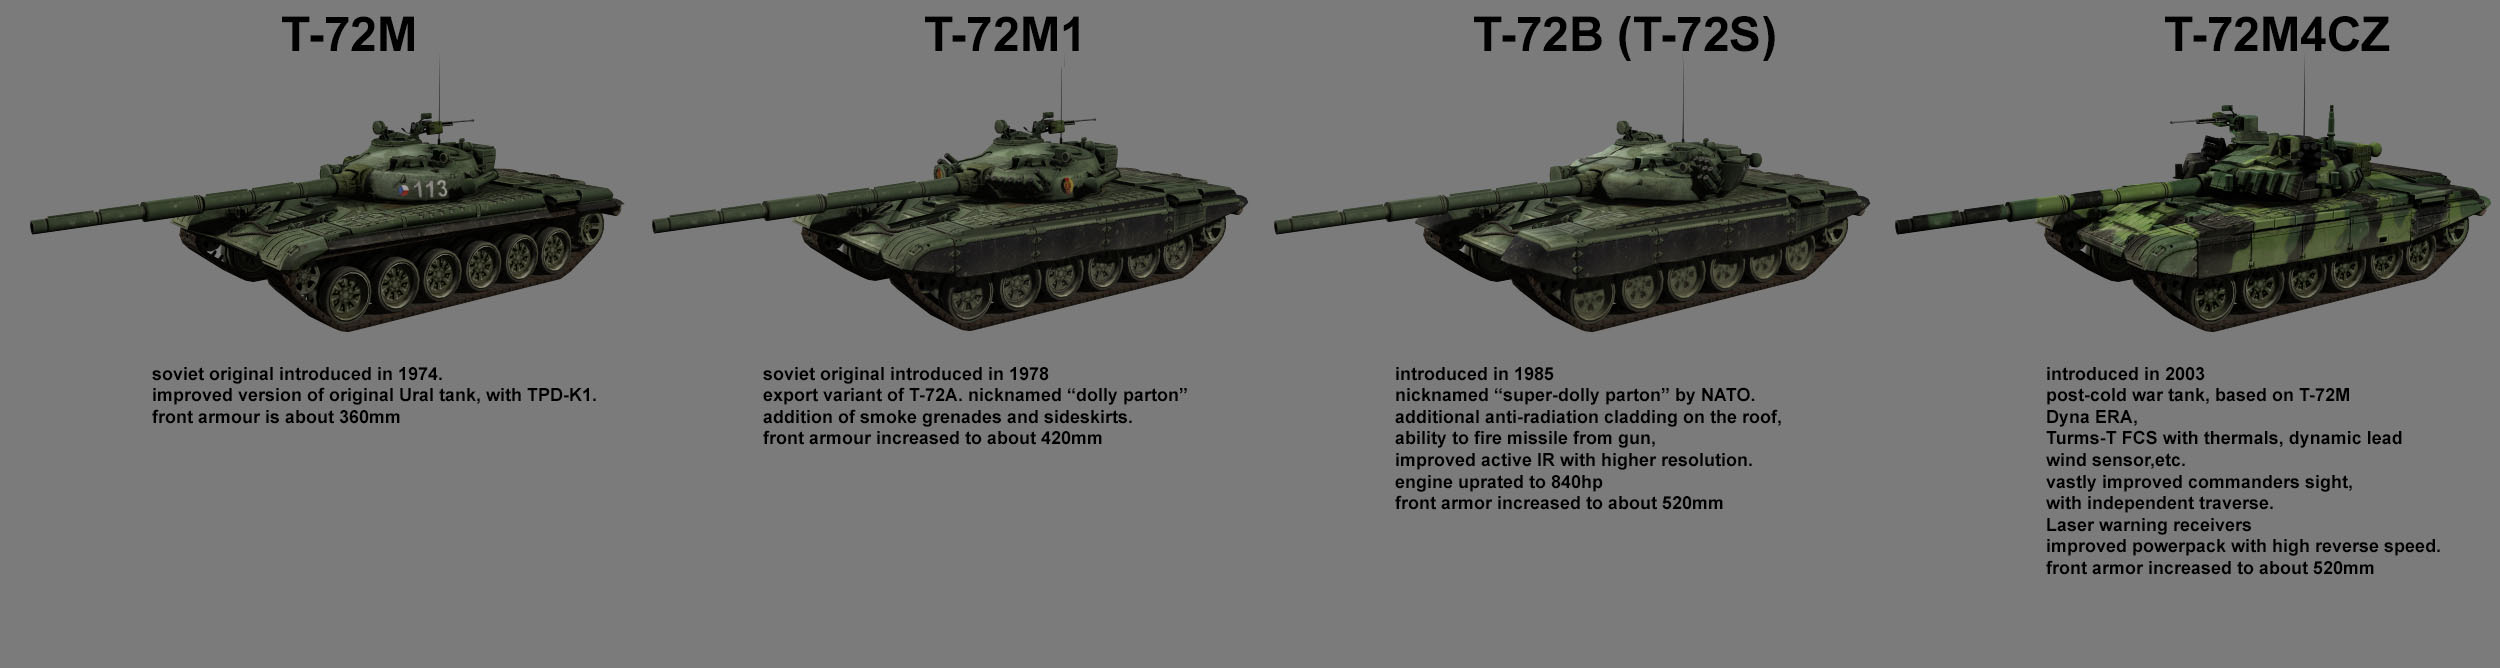 T-72 in SABOW T-72_differences